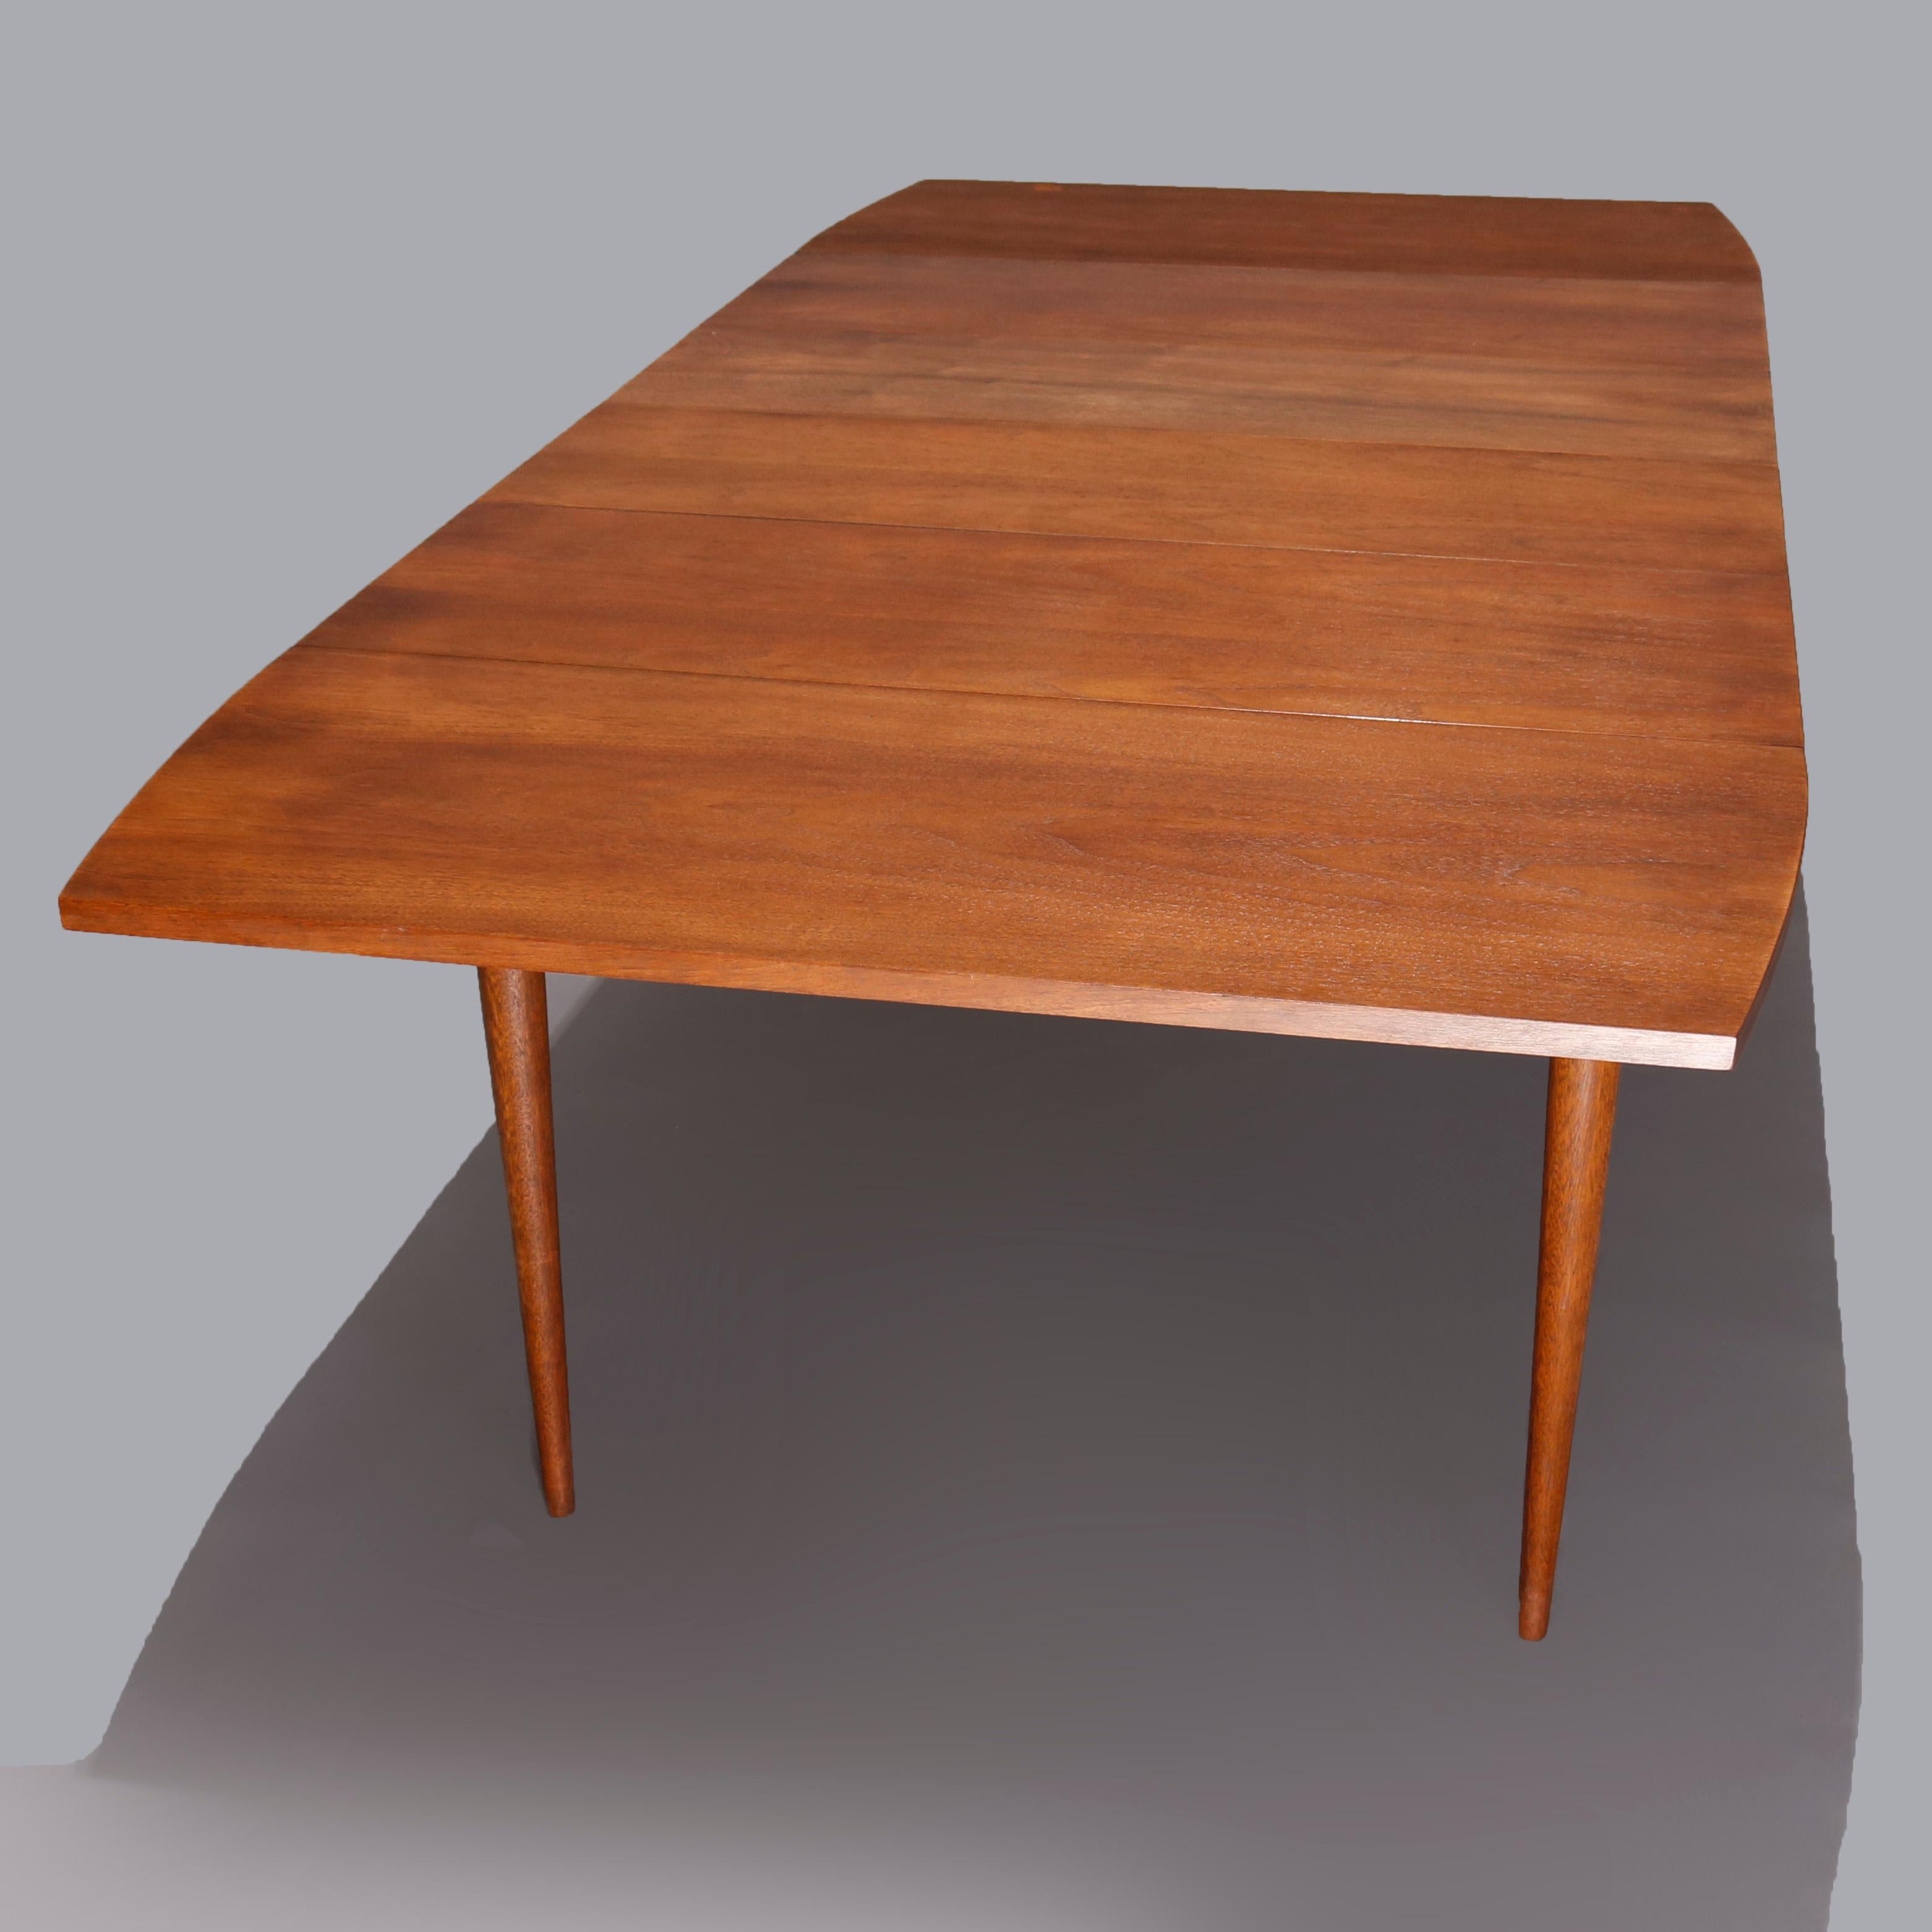 Midcentury Danish Modern Walnut Dining Table & Chairs by Broyhill, 20th Century 1